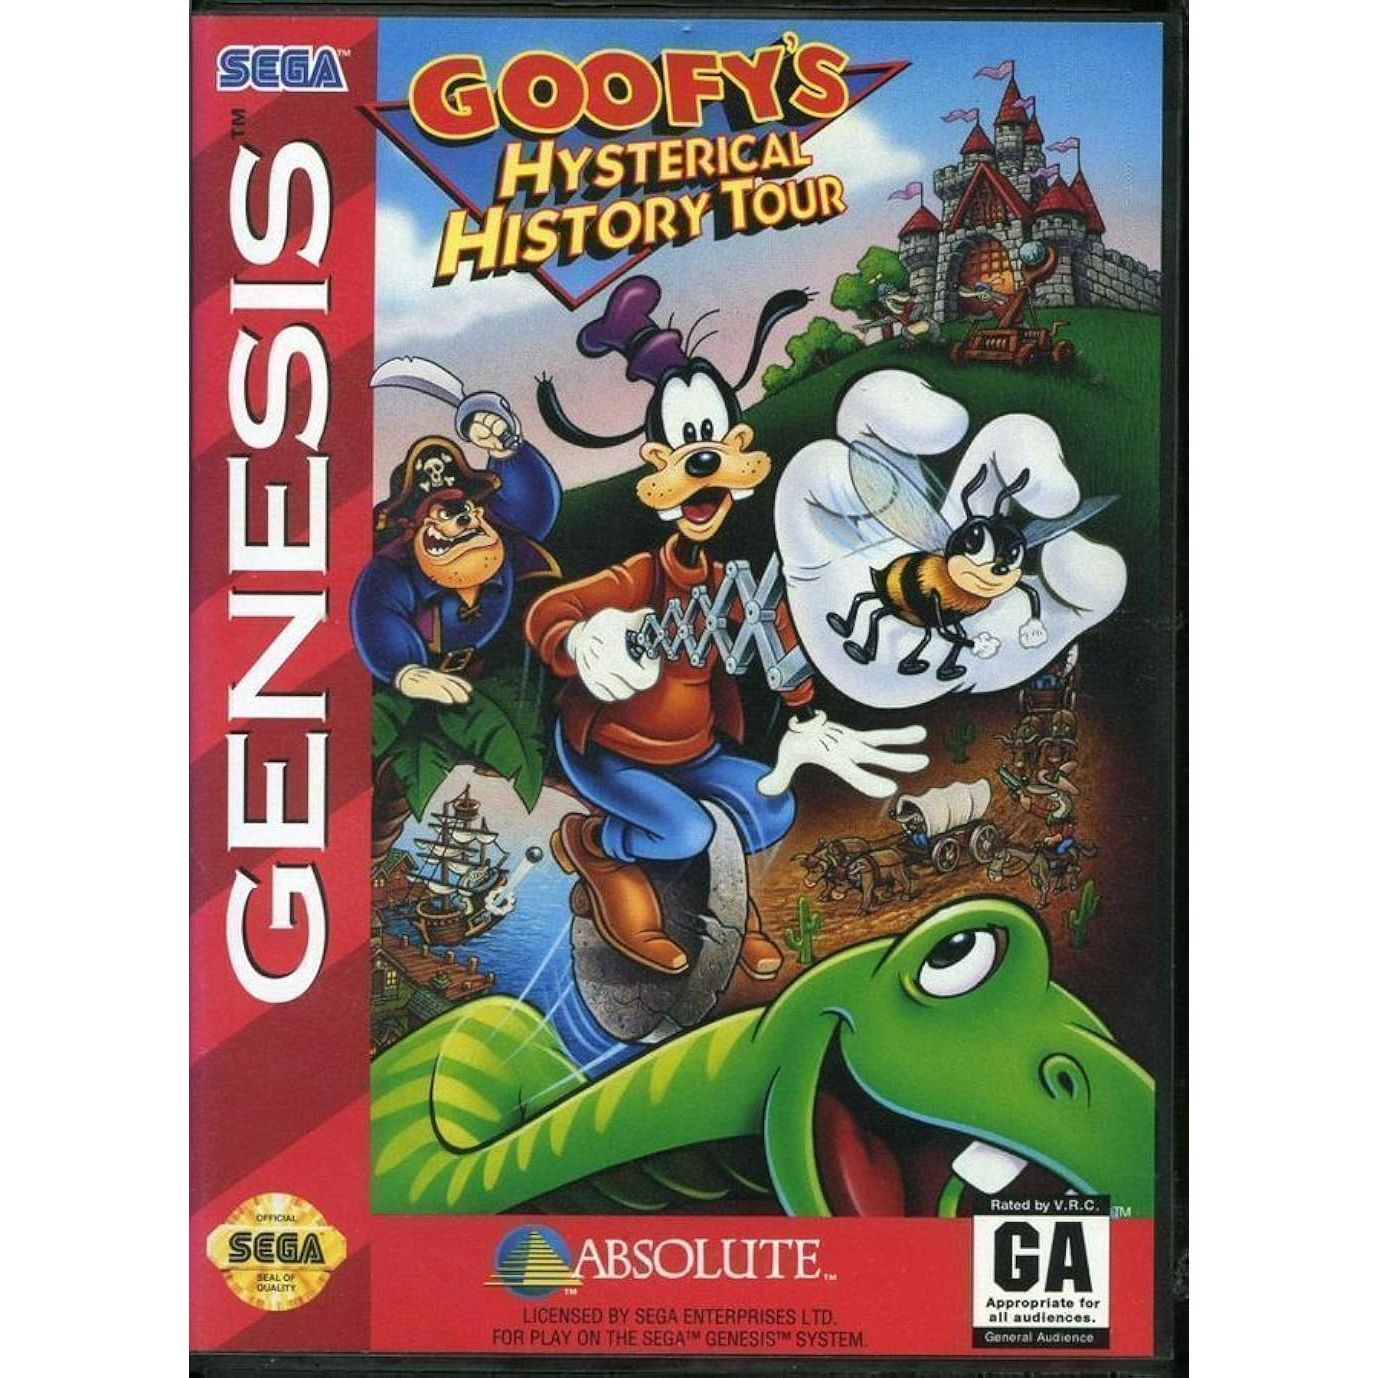 Genesis - Goofy's Hysterical History Tour (In Case / With Manual)